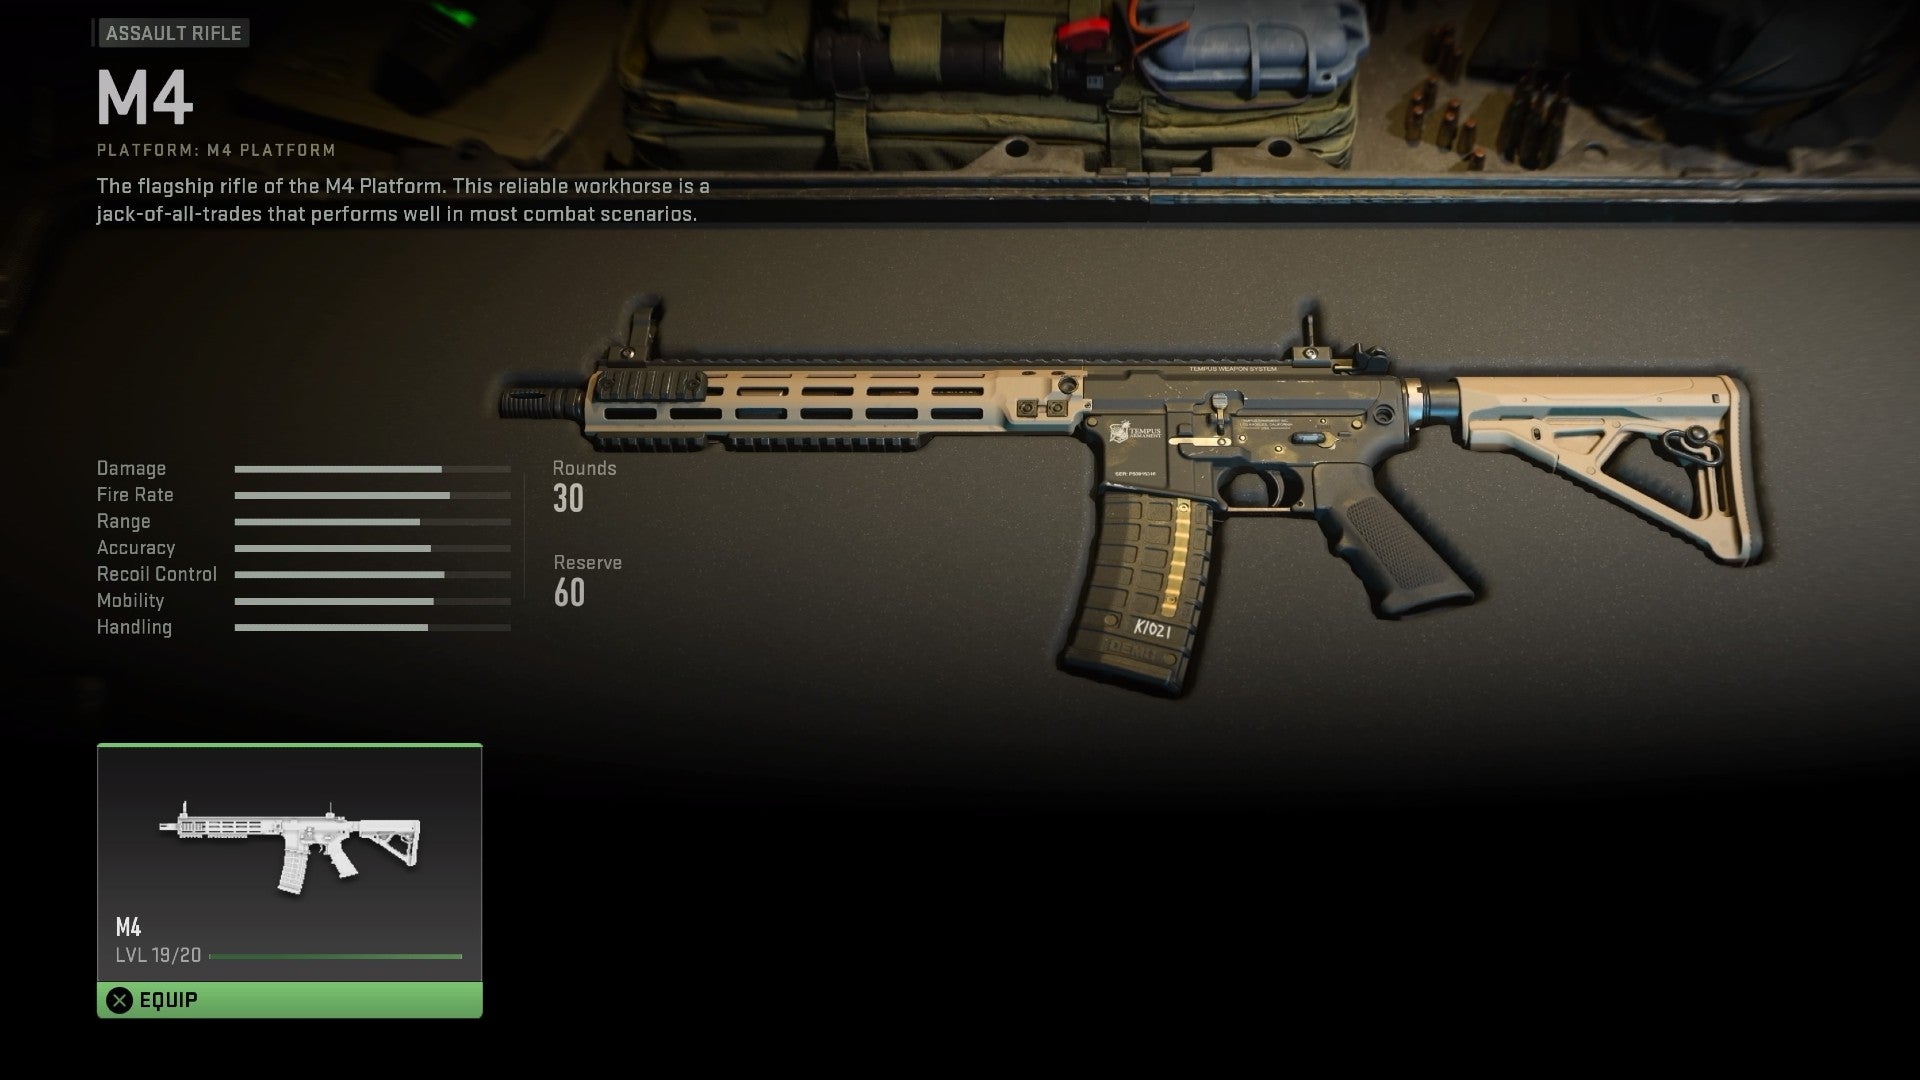 Modern Warfare 2 beta screenshot showing the M4 in a weapons container, with the stats on the left.